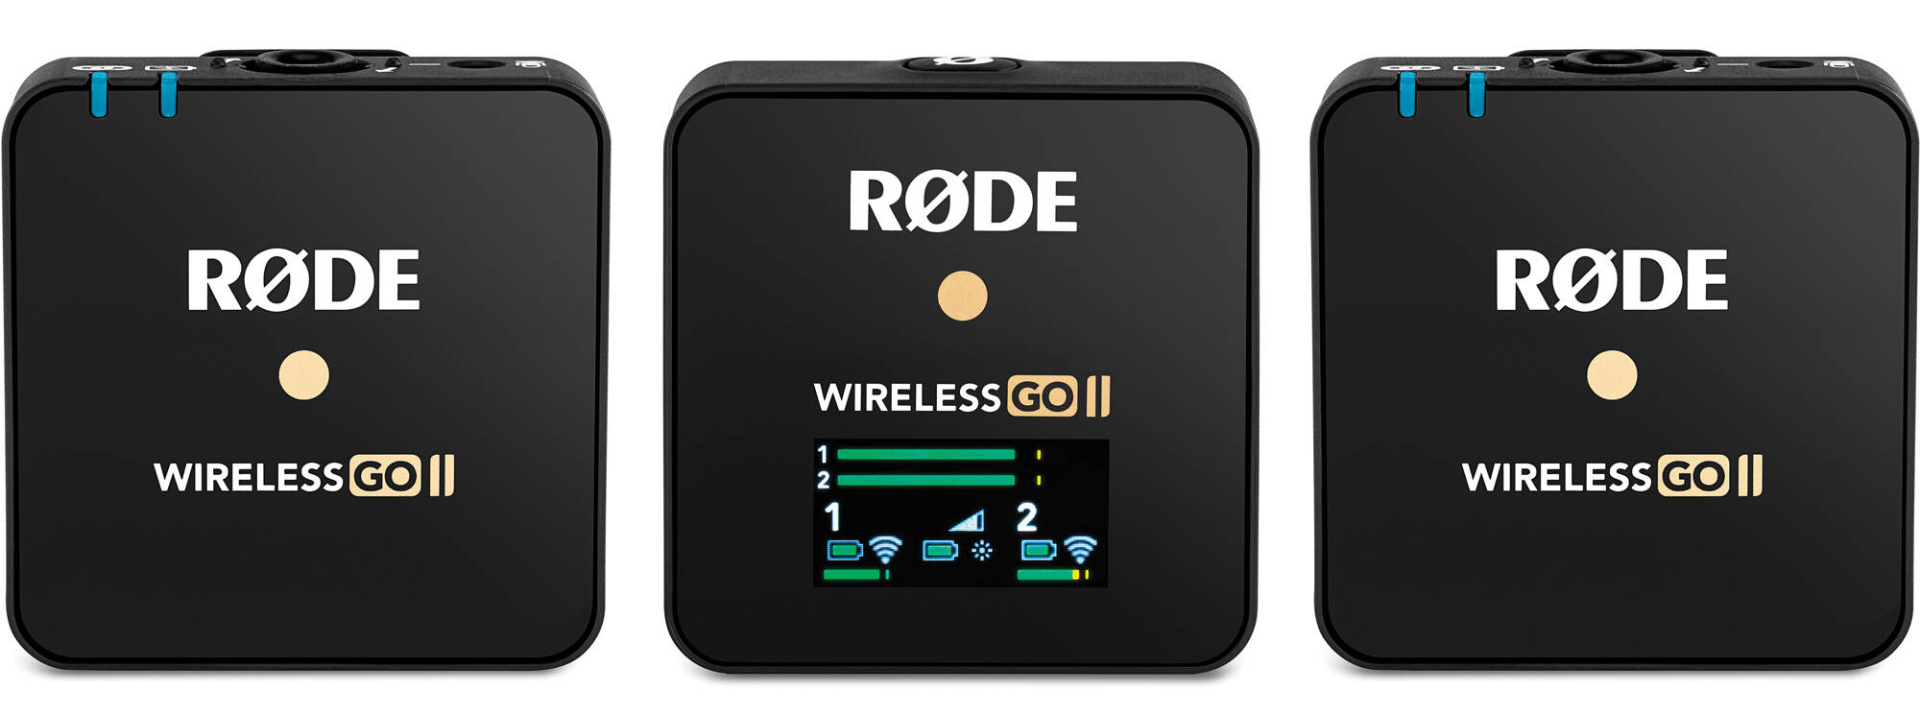 Rode Microphones Wireless GO II TX New-In-Box at Roberts Camera